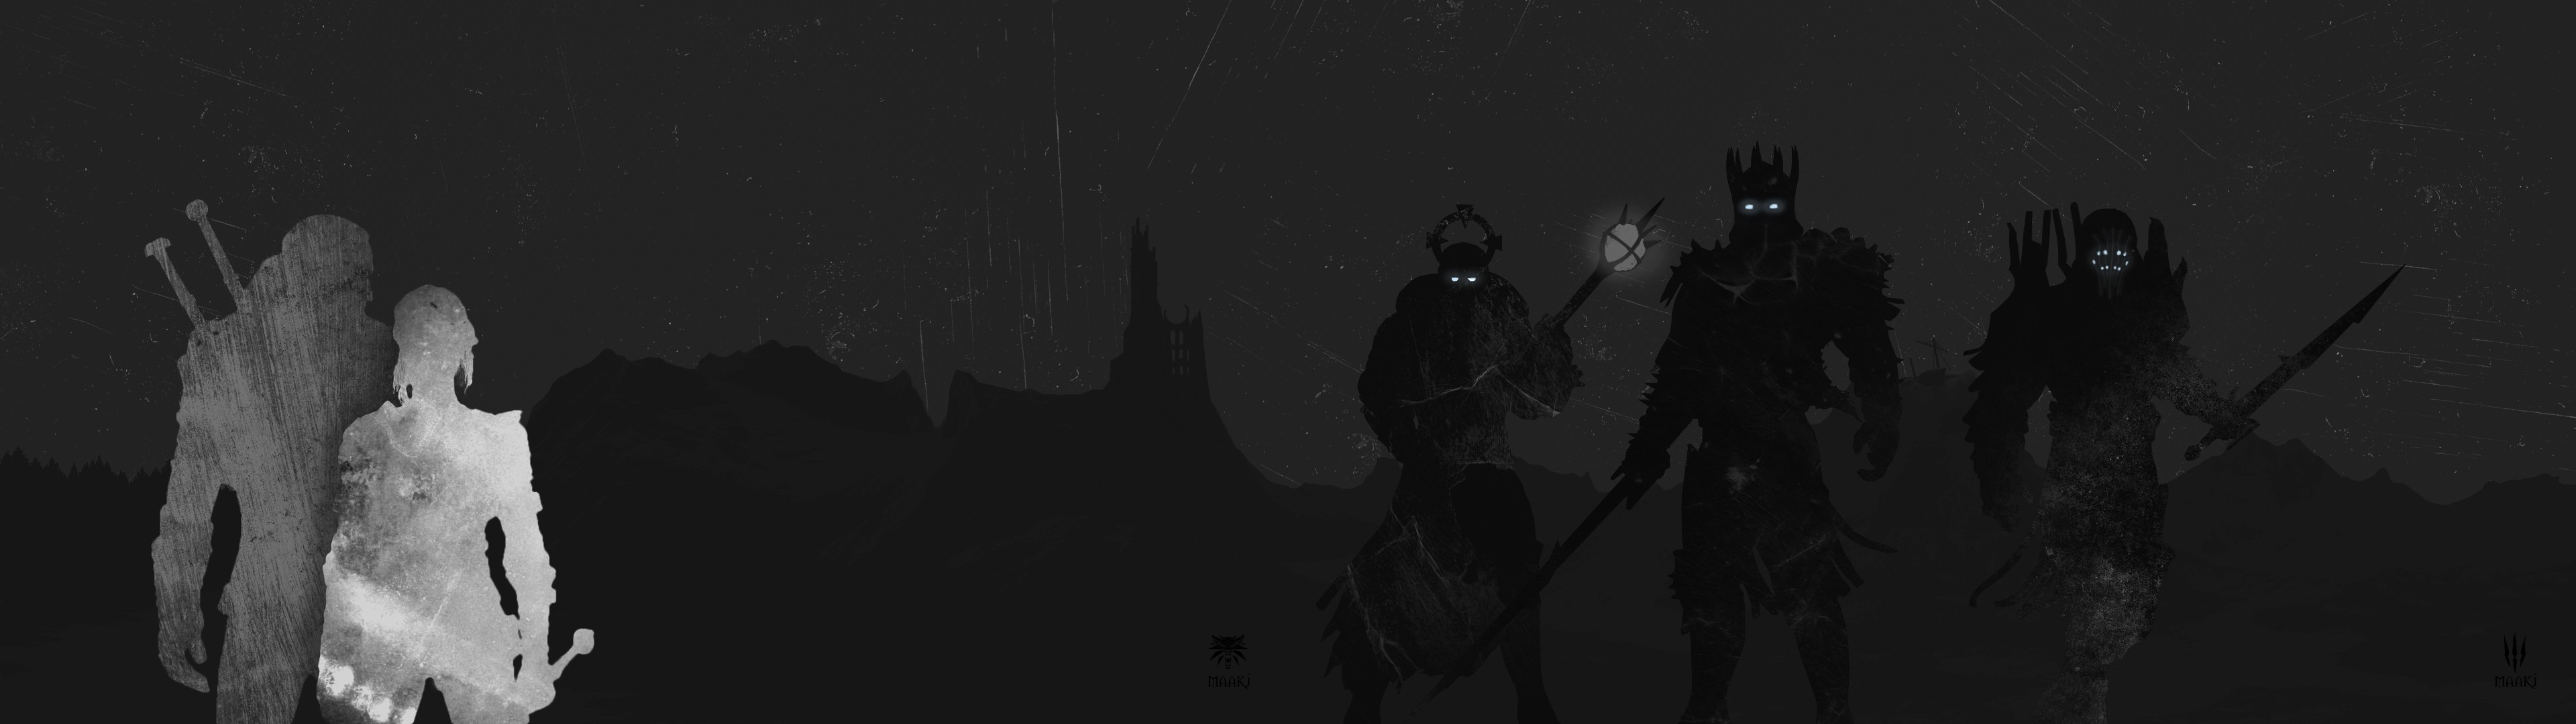 General 3840x1080 The Witcher The Witcher 3: Wild Hunt Geralt of Rivia Cirilla Fiona Elen Riannon video games minimalism RPG PC gaming collage